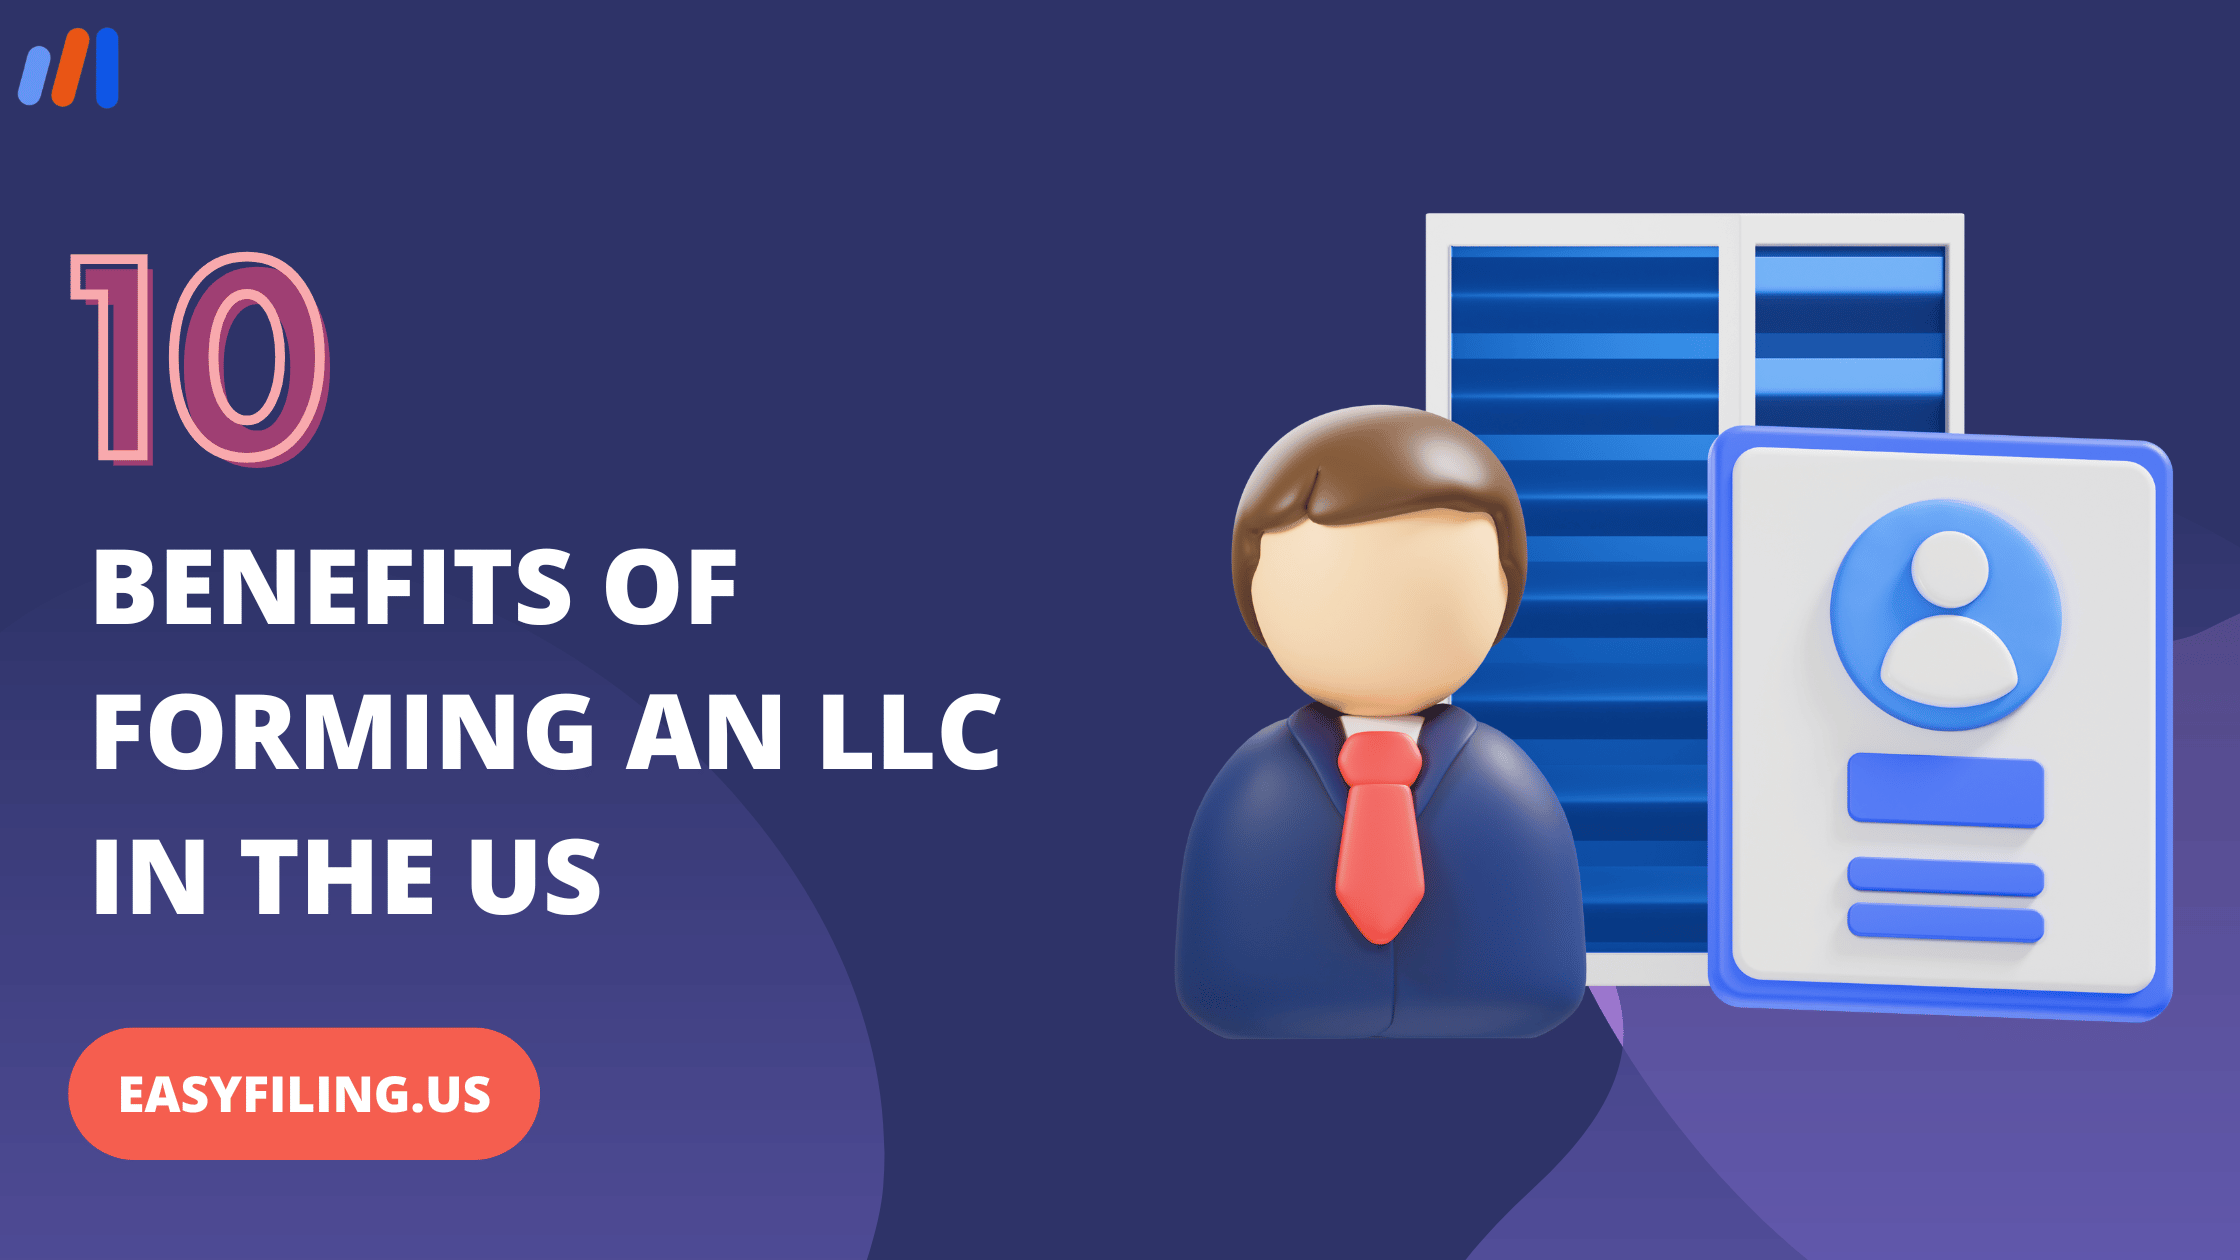 Benefits of forming an LLC in the US